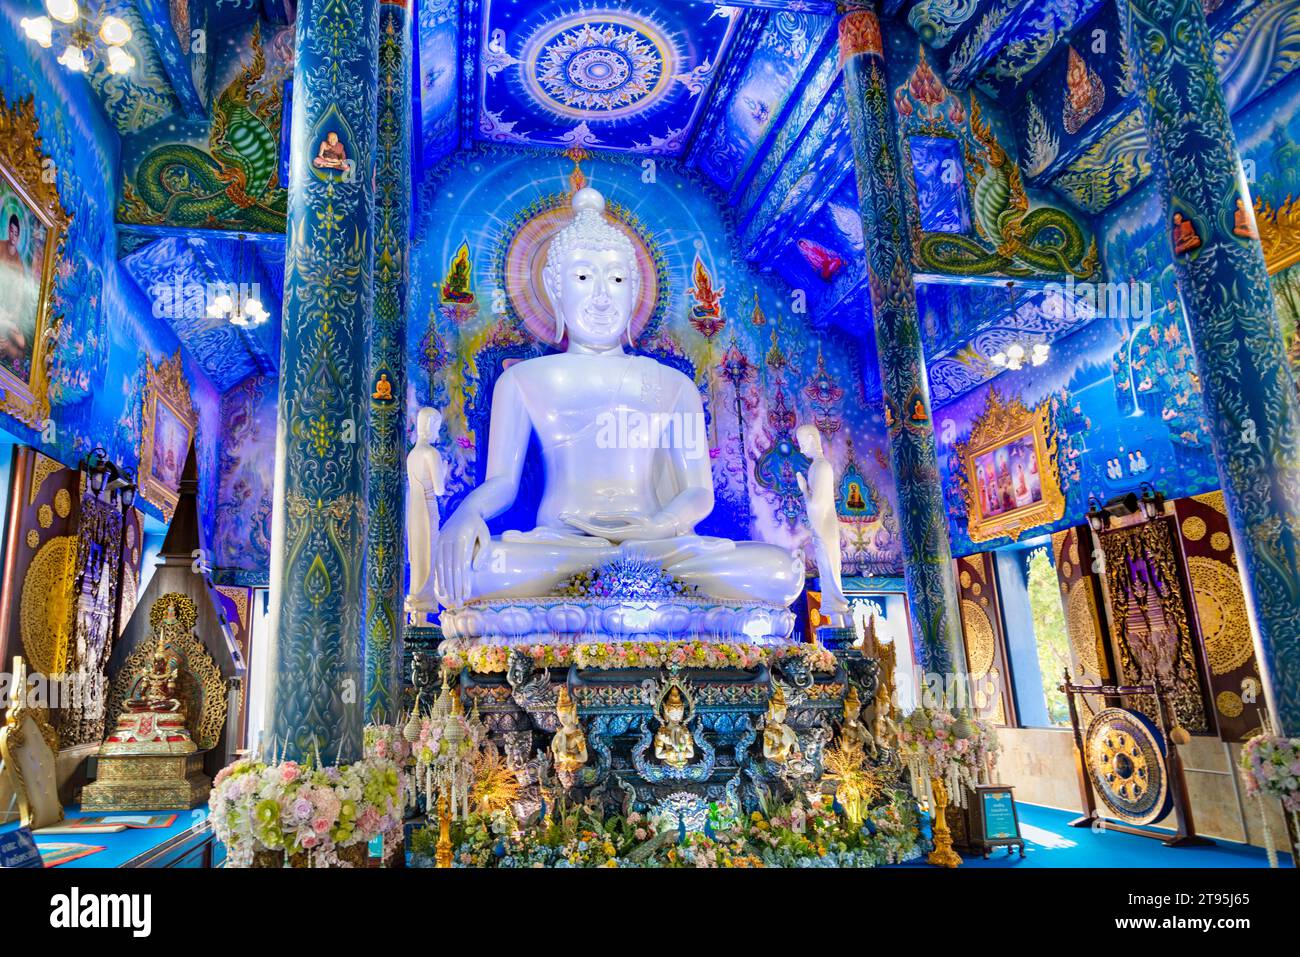 The Blue Temple,Beautifully decorated inside with intricate designs and aqua blue hues,with flowers,ornaments and framed paintings featuring religious Stock Photo